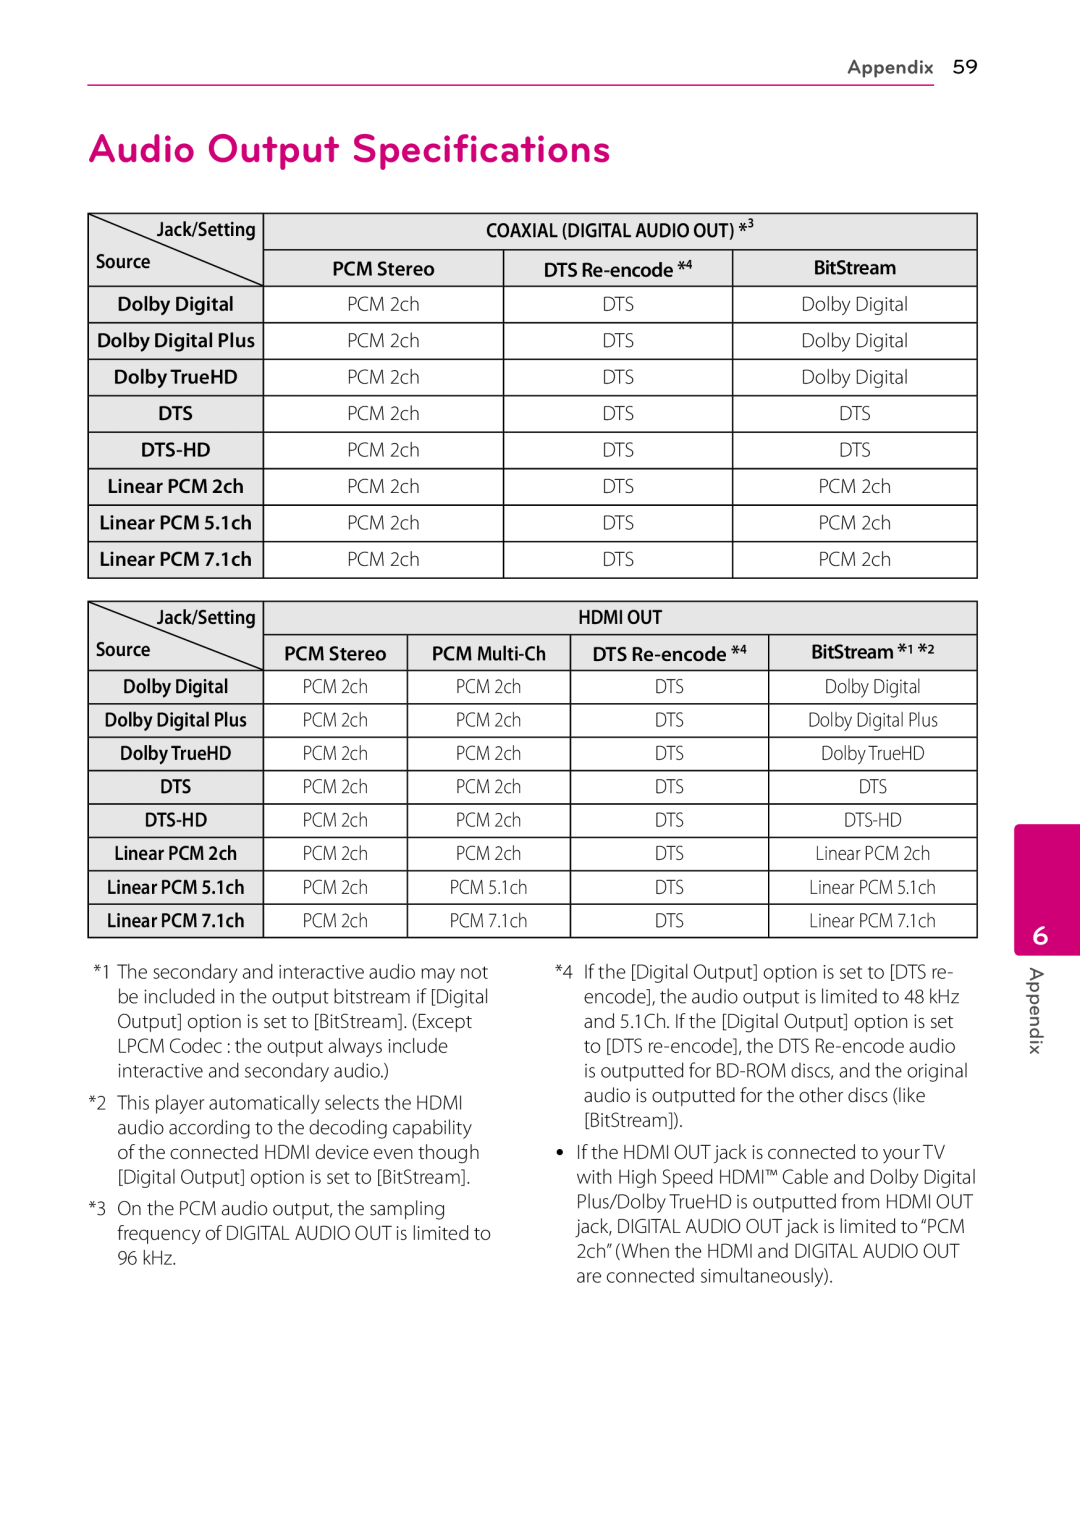 LG Electronics BP530 owner manual Audio Output Specifications, Appendix 